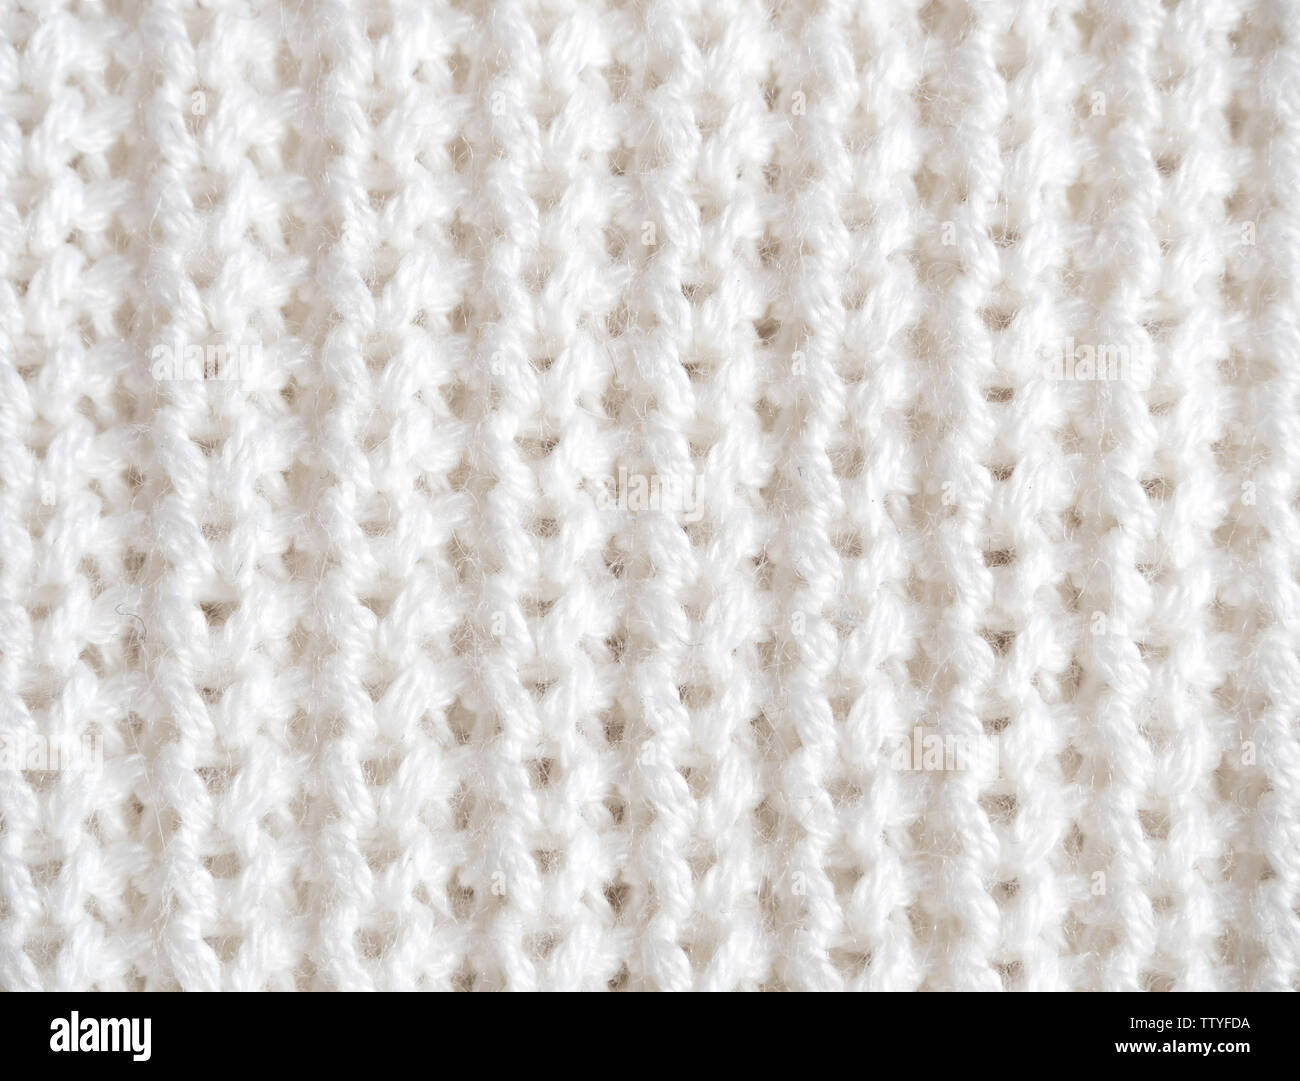 Knitted loops background. Part knitted sweater. Knitted texture. White Knitted Fabric Texture. White knitting wool texture background. Wool sweater Stock Photo